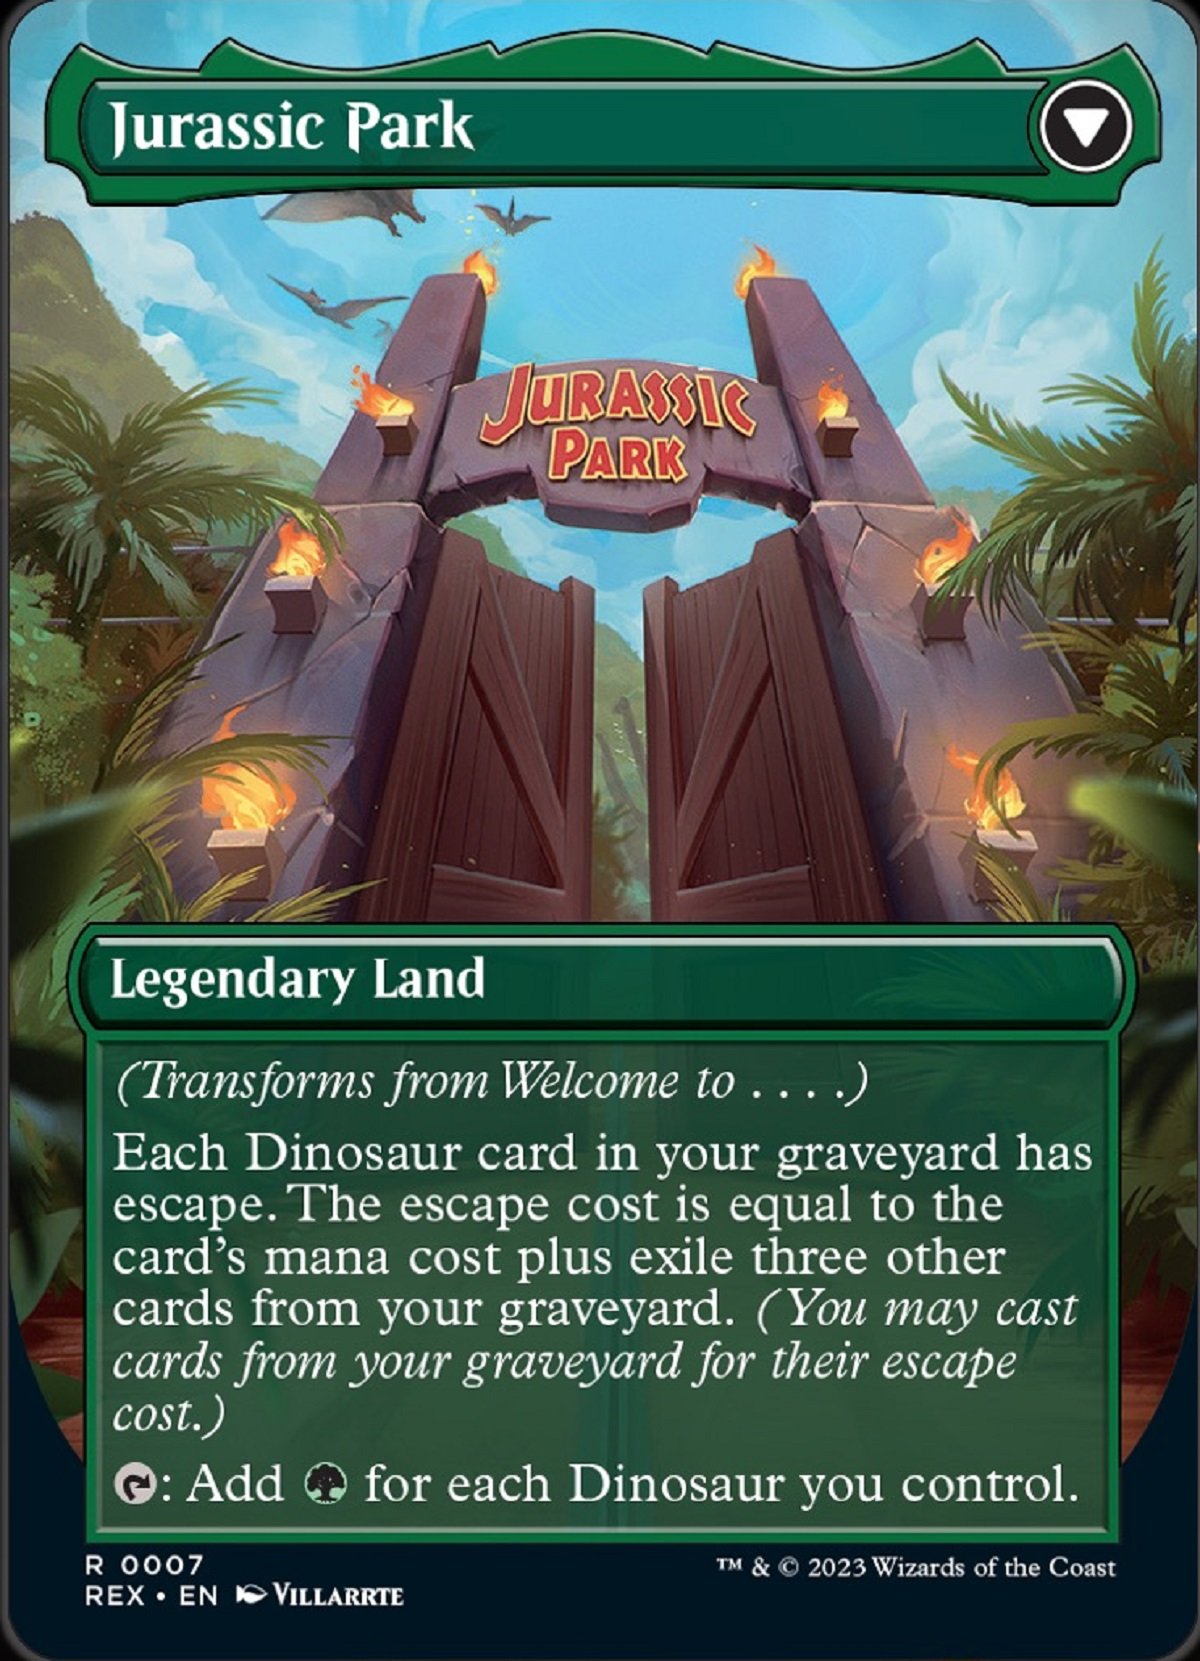 Wizards of the Coast's new Jurassic Park u0022Welcome to Jurassic Parku0022 Magic: The Gathering card.